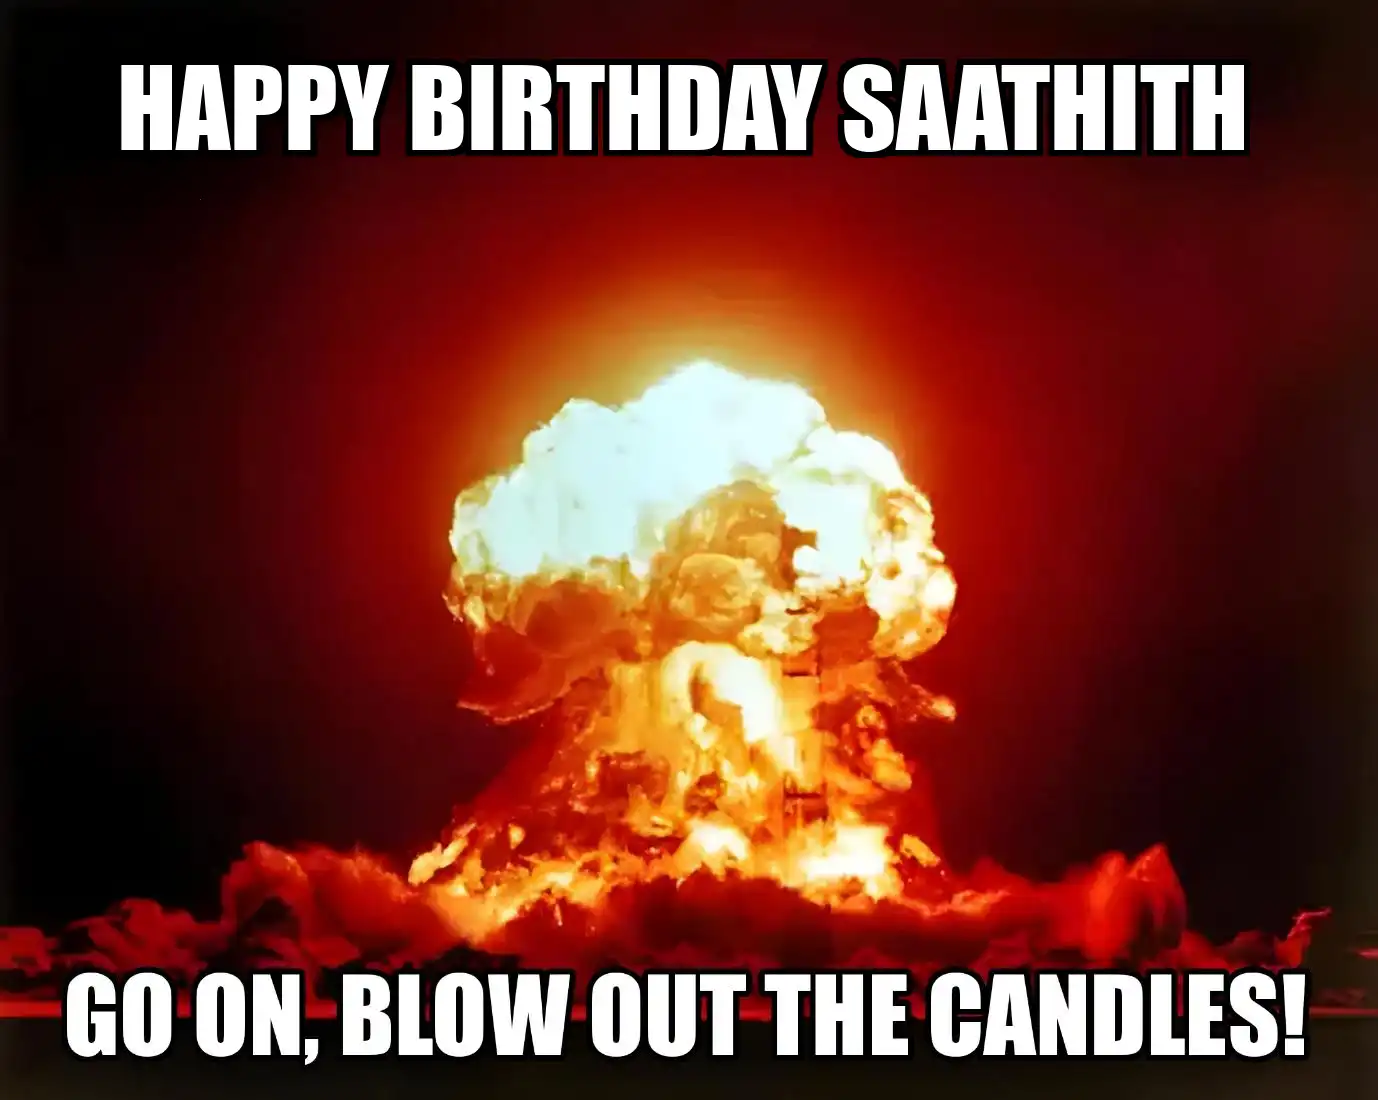 Happy Birthday Saathith Go On Blow Out The Candles Meme